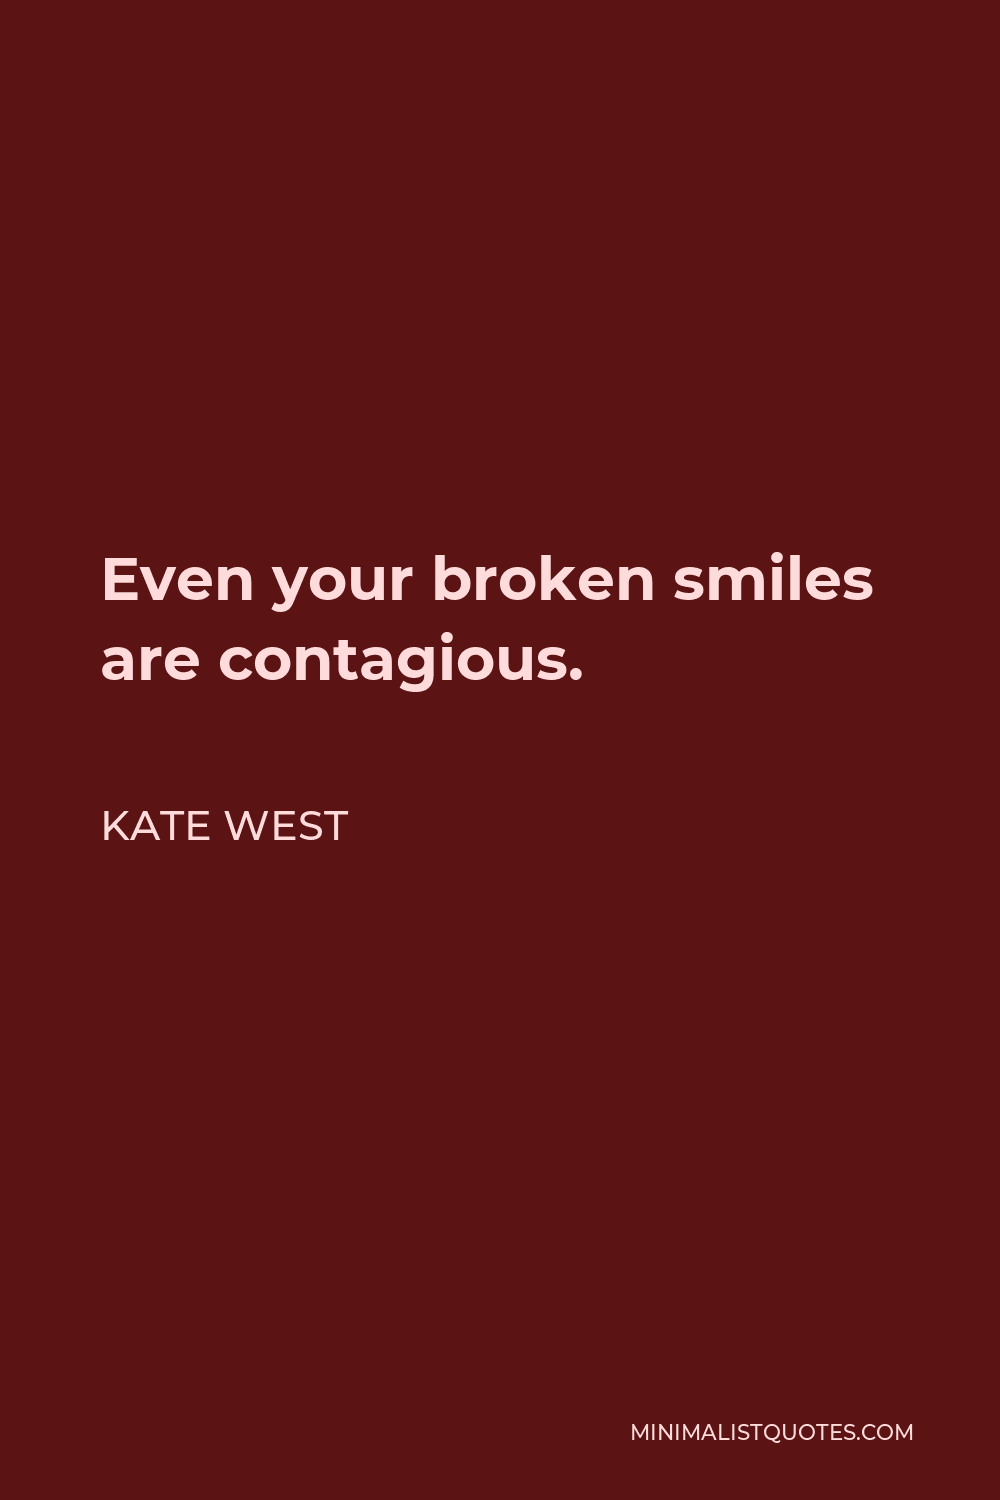 Kate West Quote - Even your broken smiles are contagious.